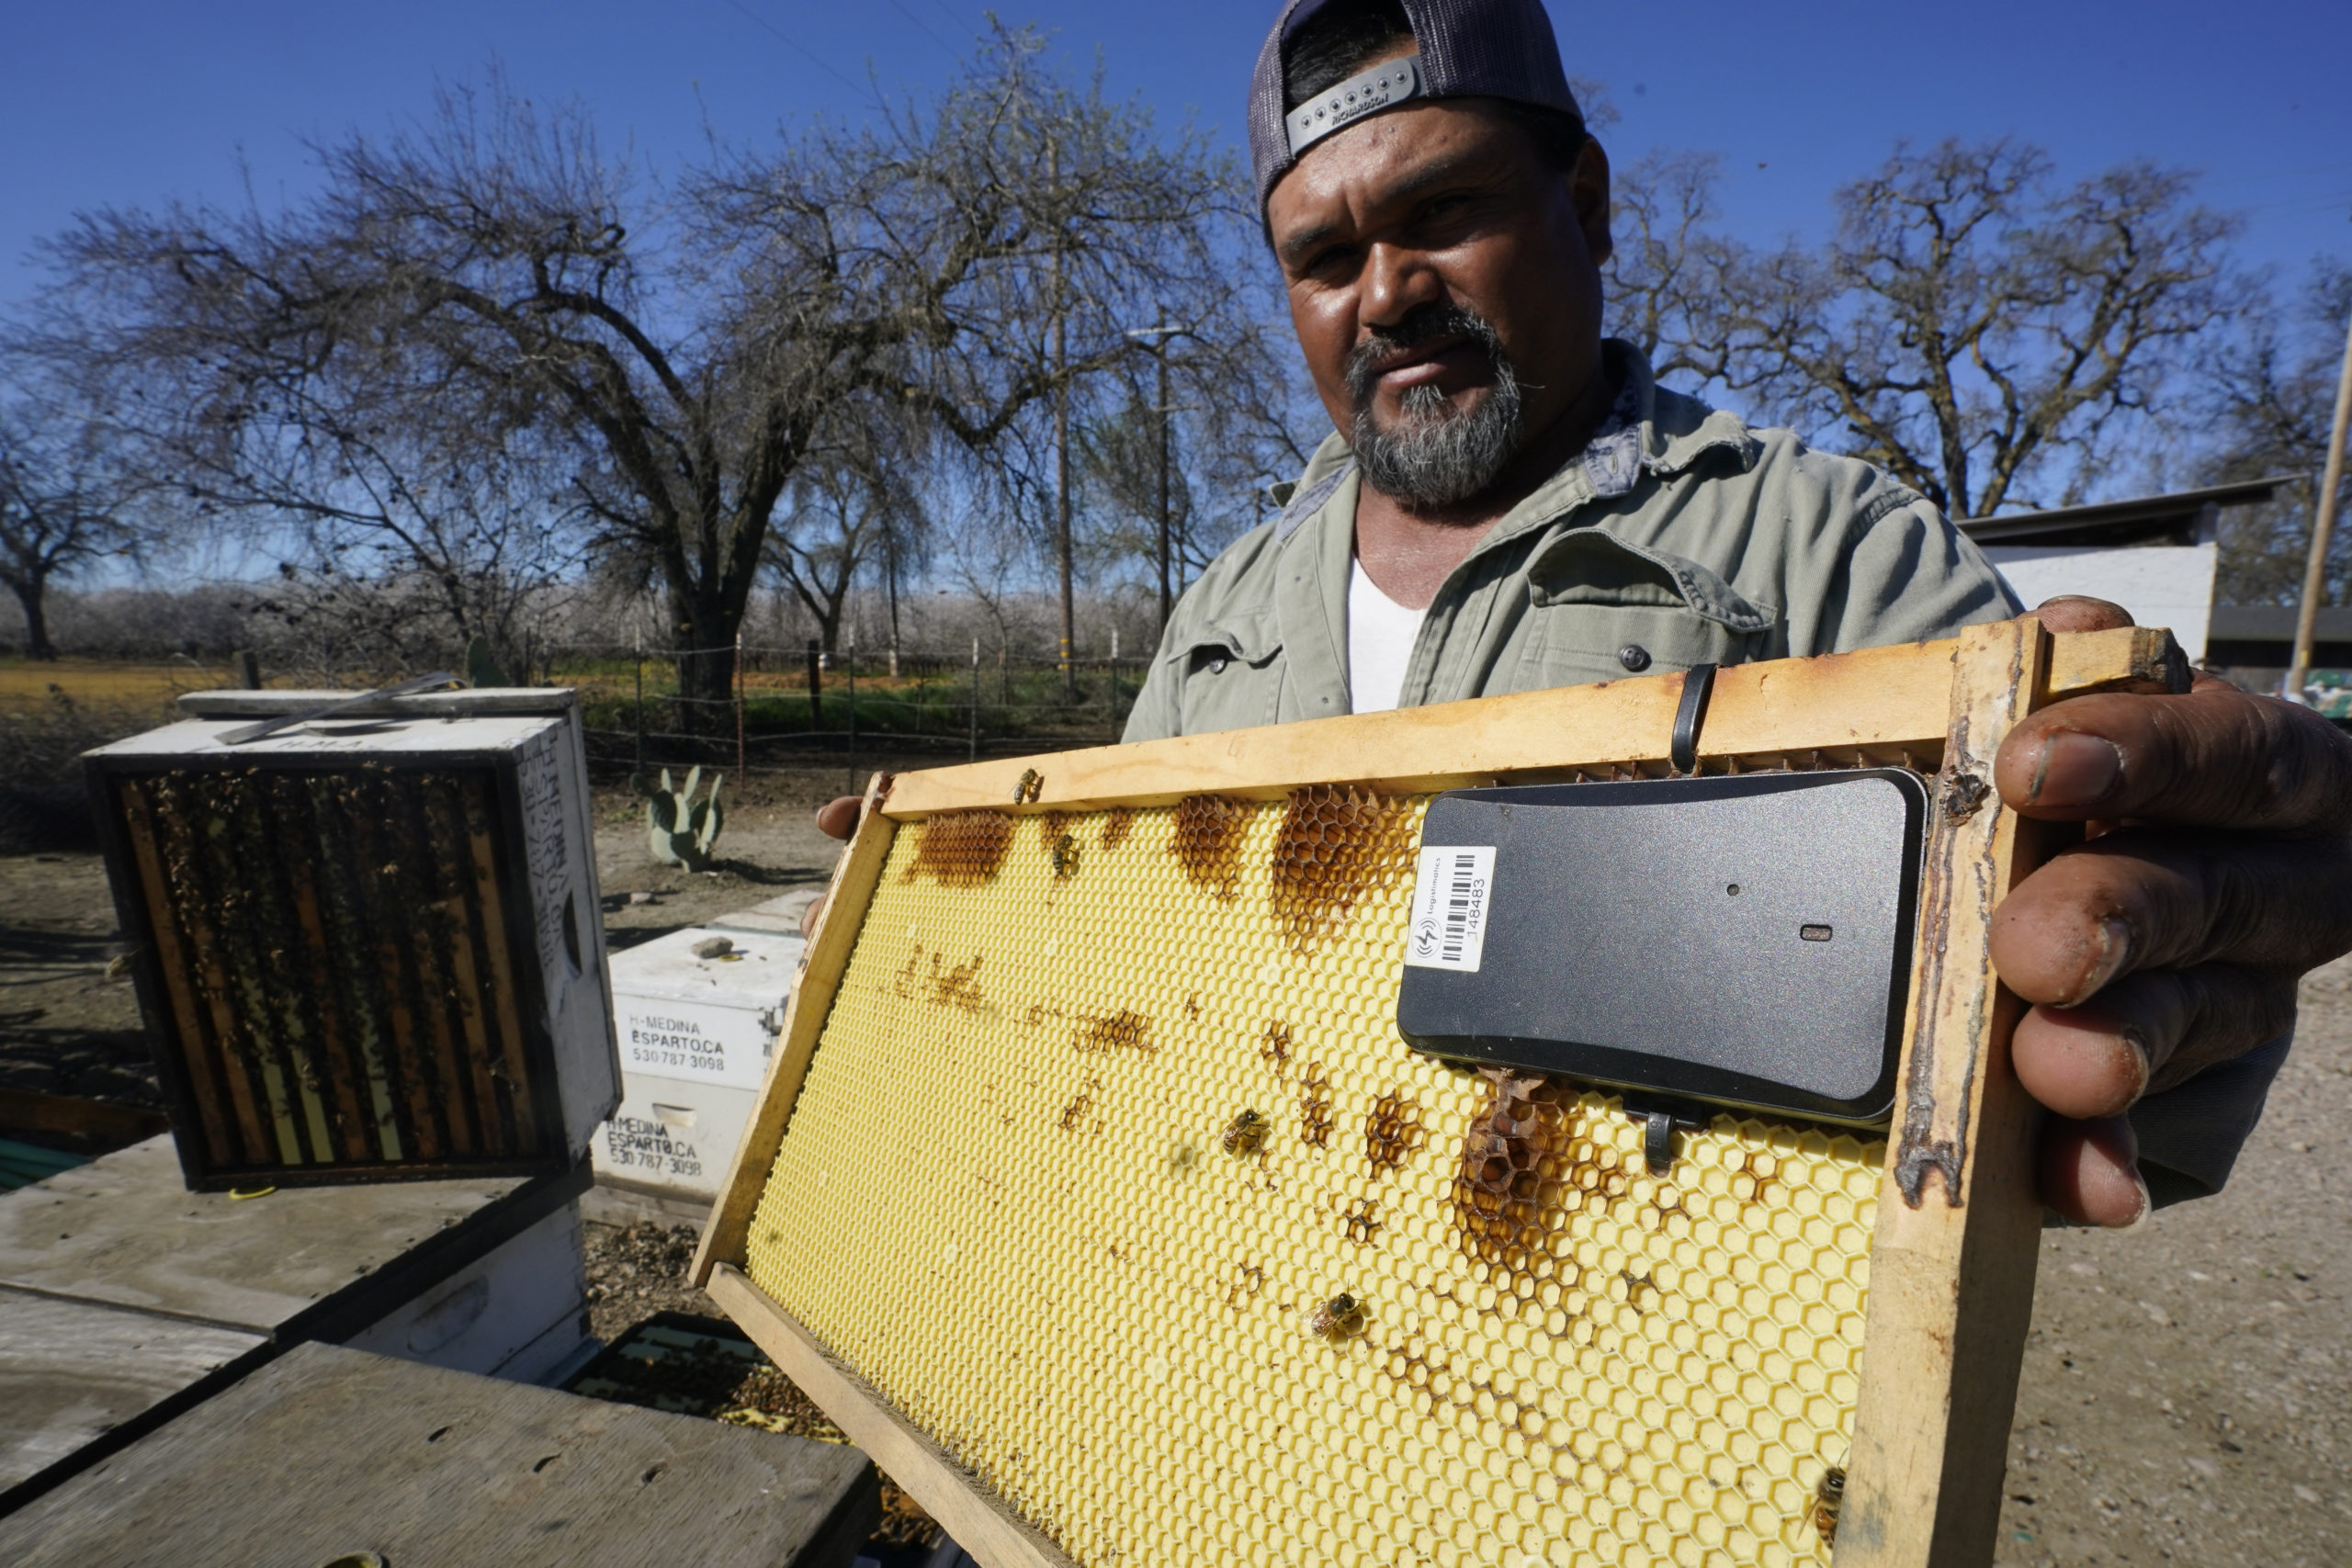 Beekeeper Hello Medina displays a beehive frame outfitted with a GPS locater that will be installed...